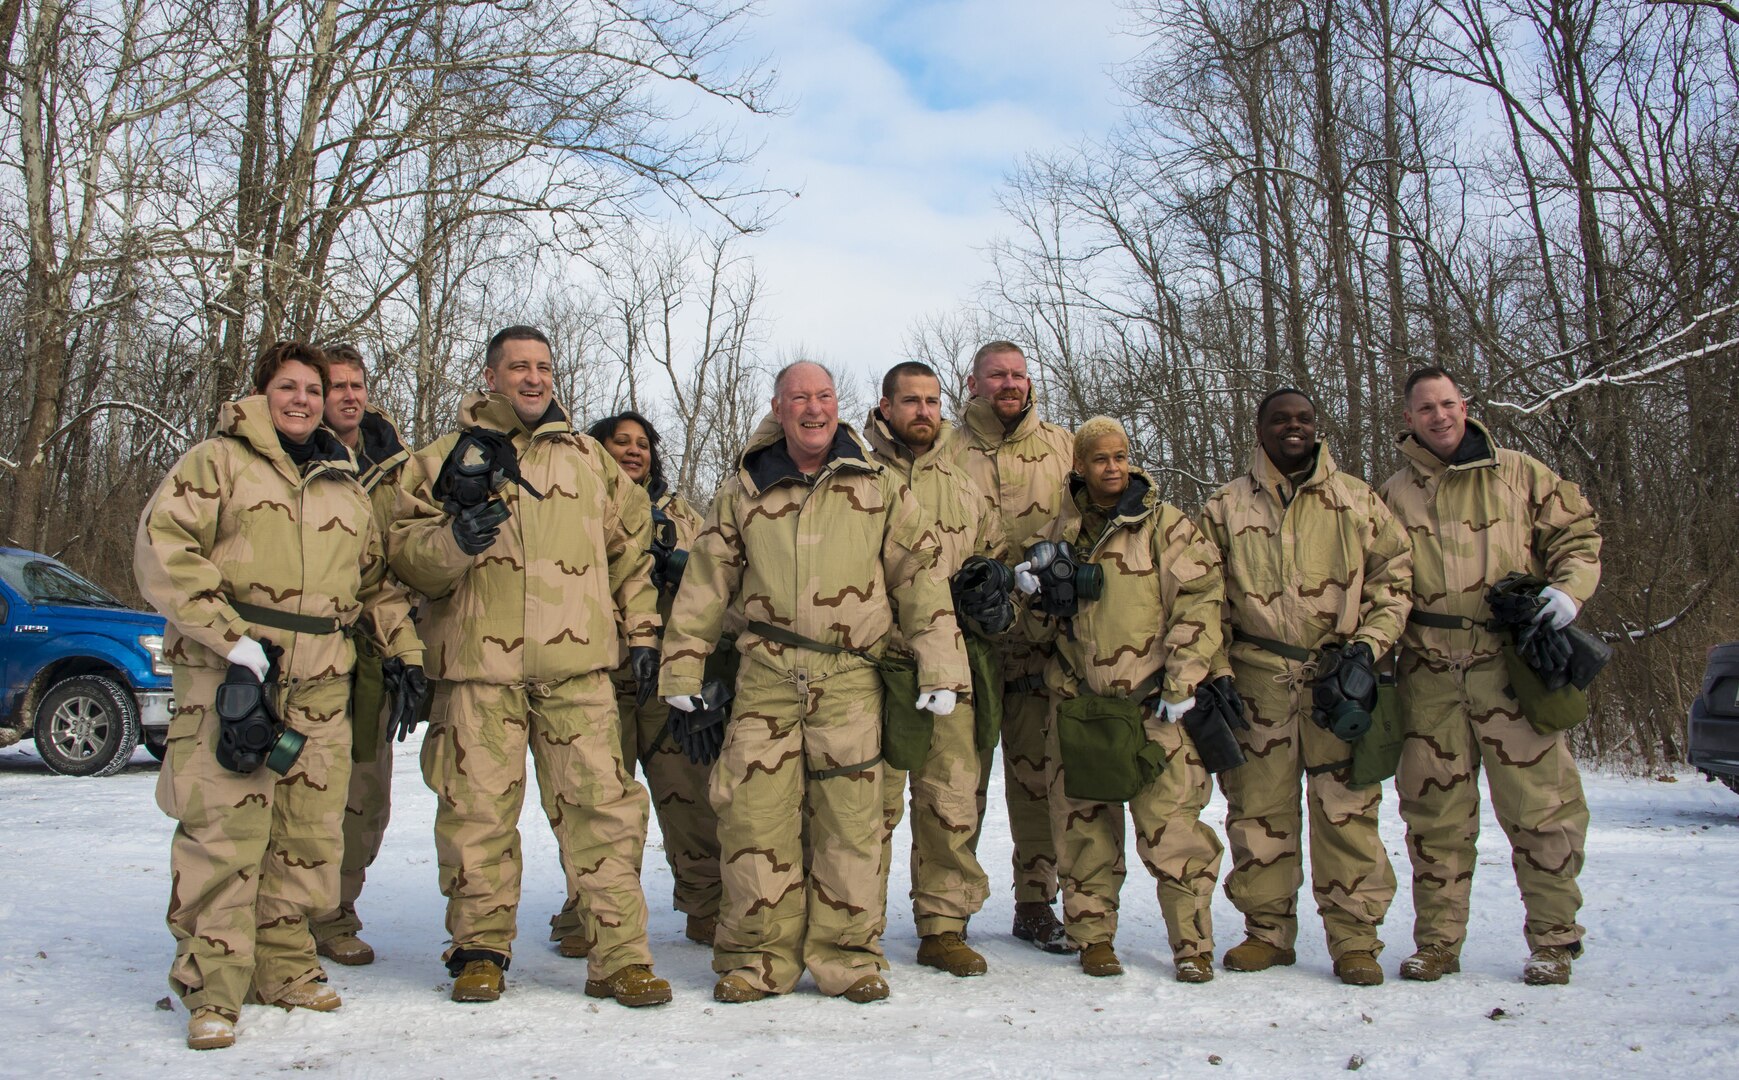 Members of DLA’s rapid deployment Red Team pose for a photo during mobilization training at Camp Atterbury, Indiana, Jan. 16-20. Photo by Army 1st Lt. Caitlin Sweet